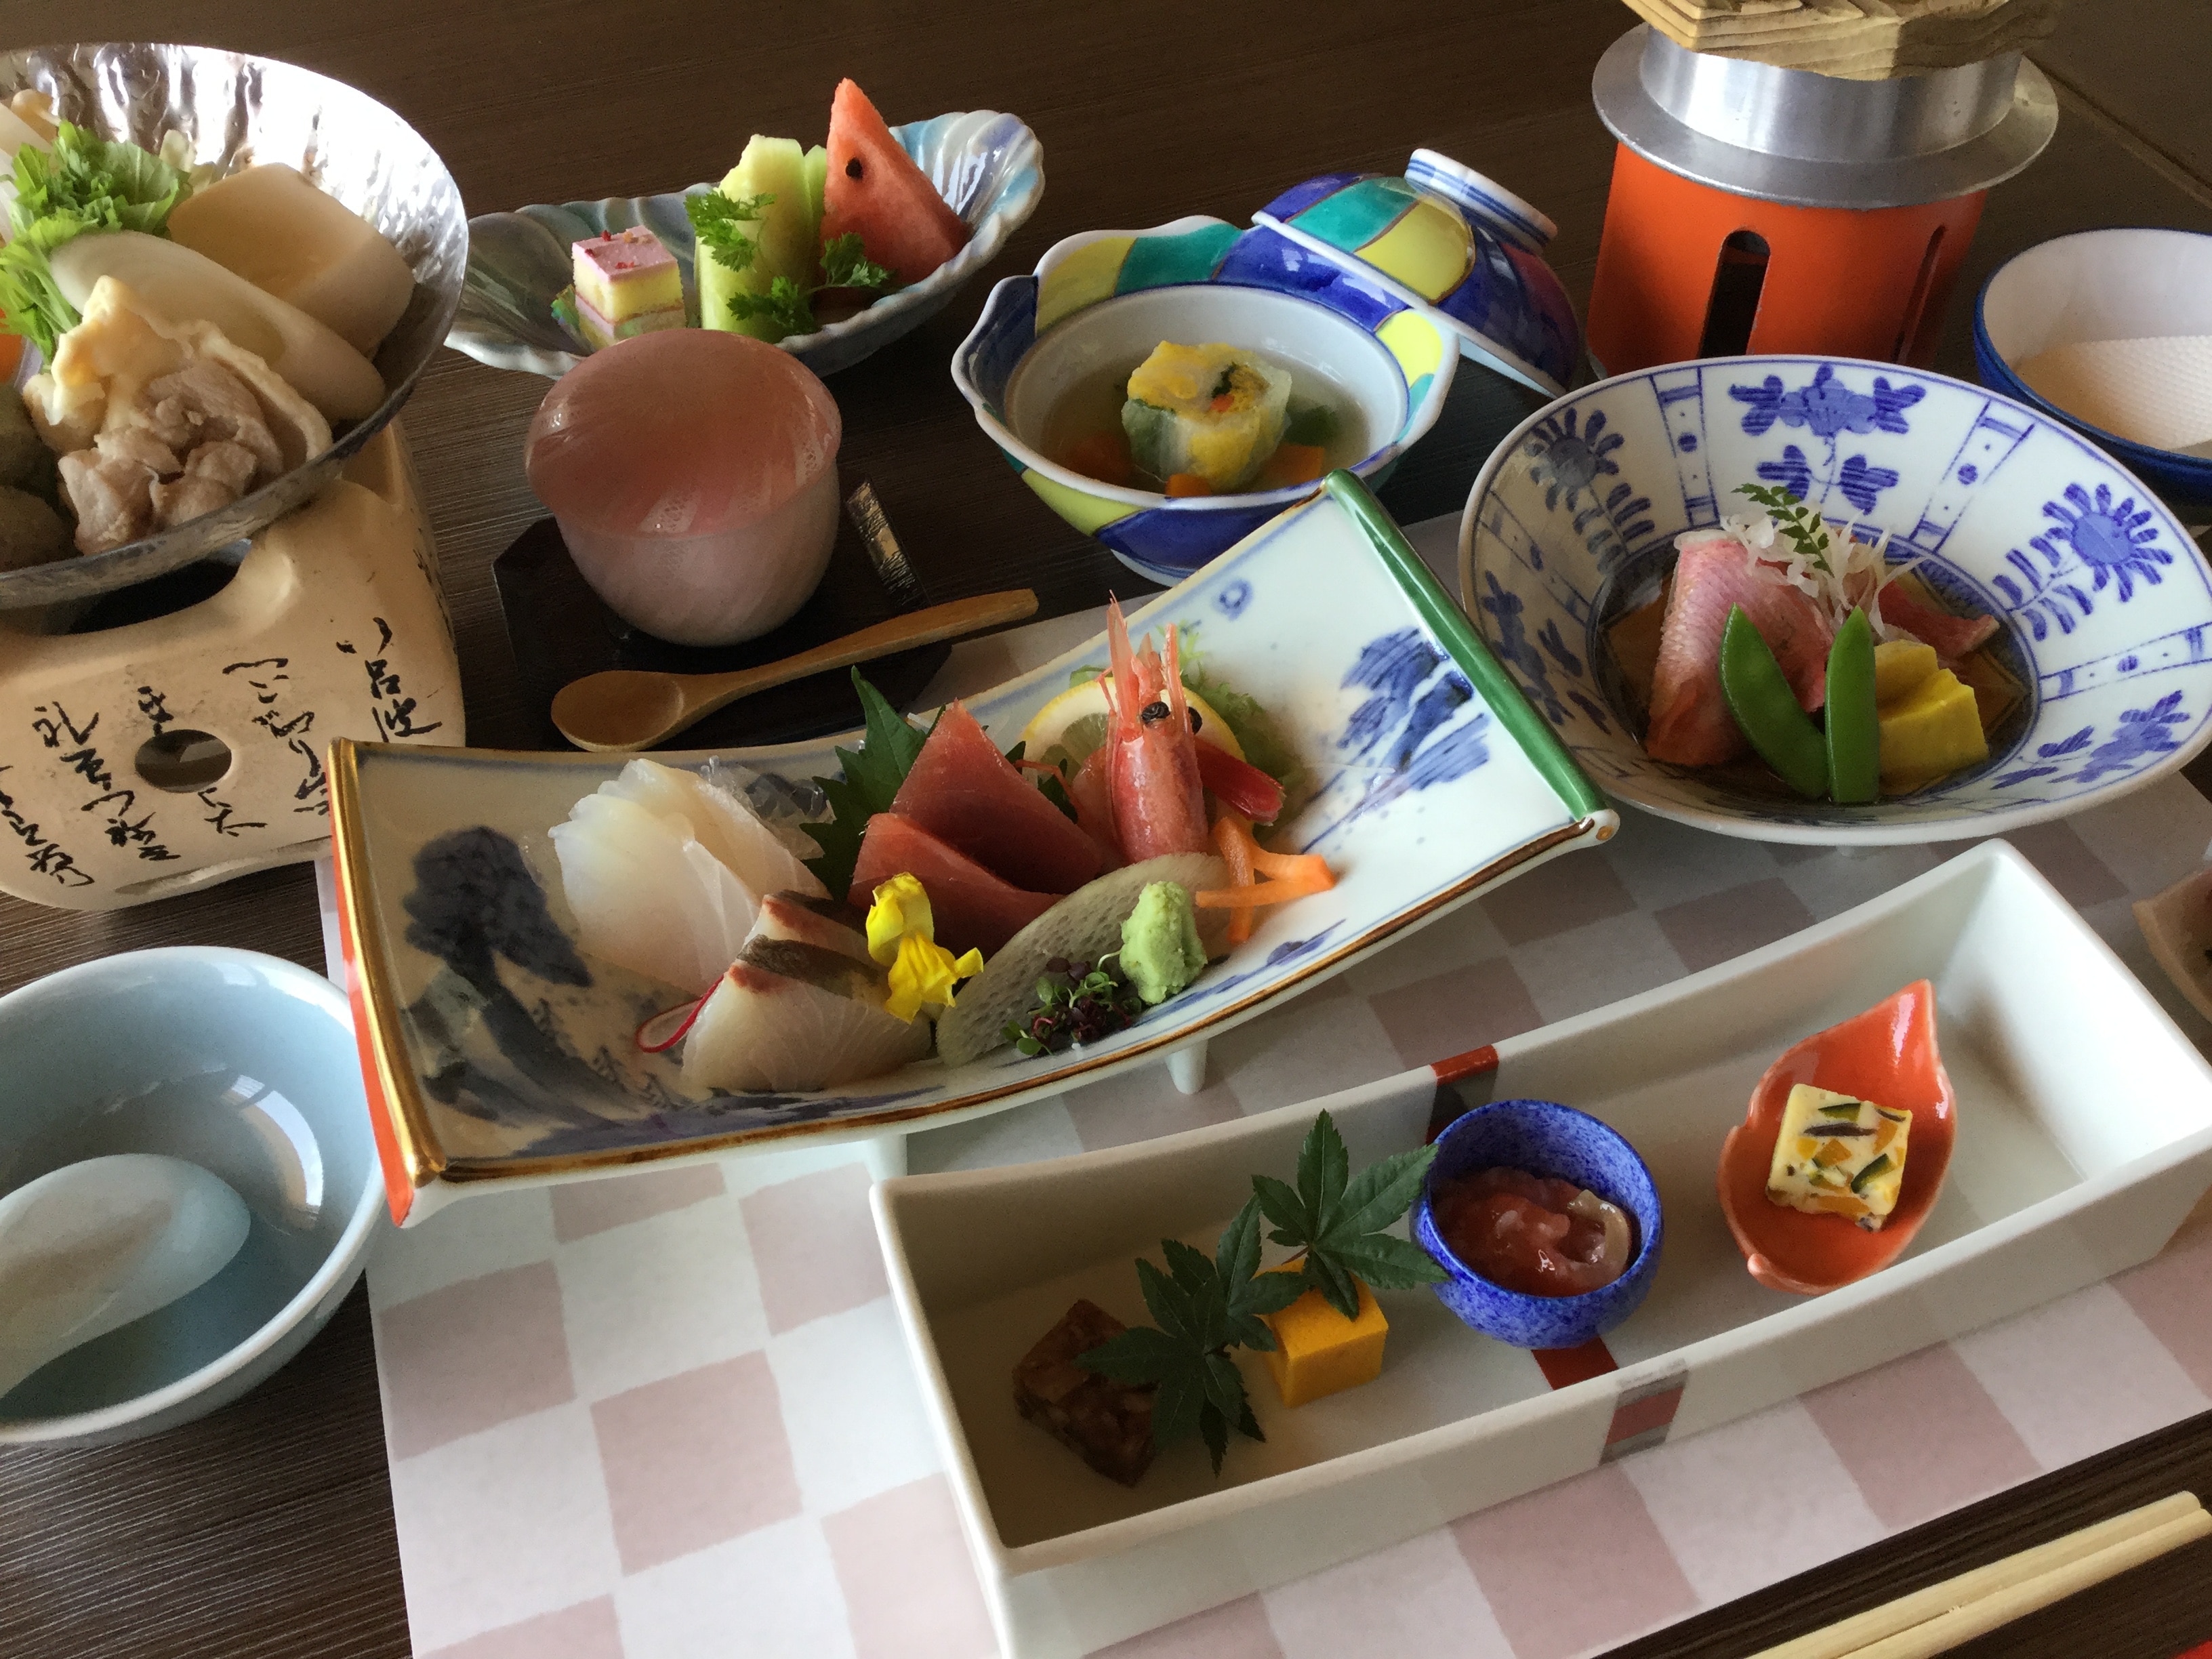 An example of Tsukimi dinner